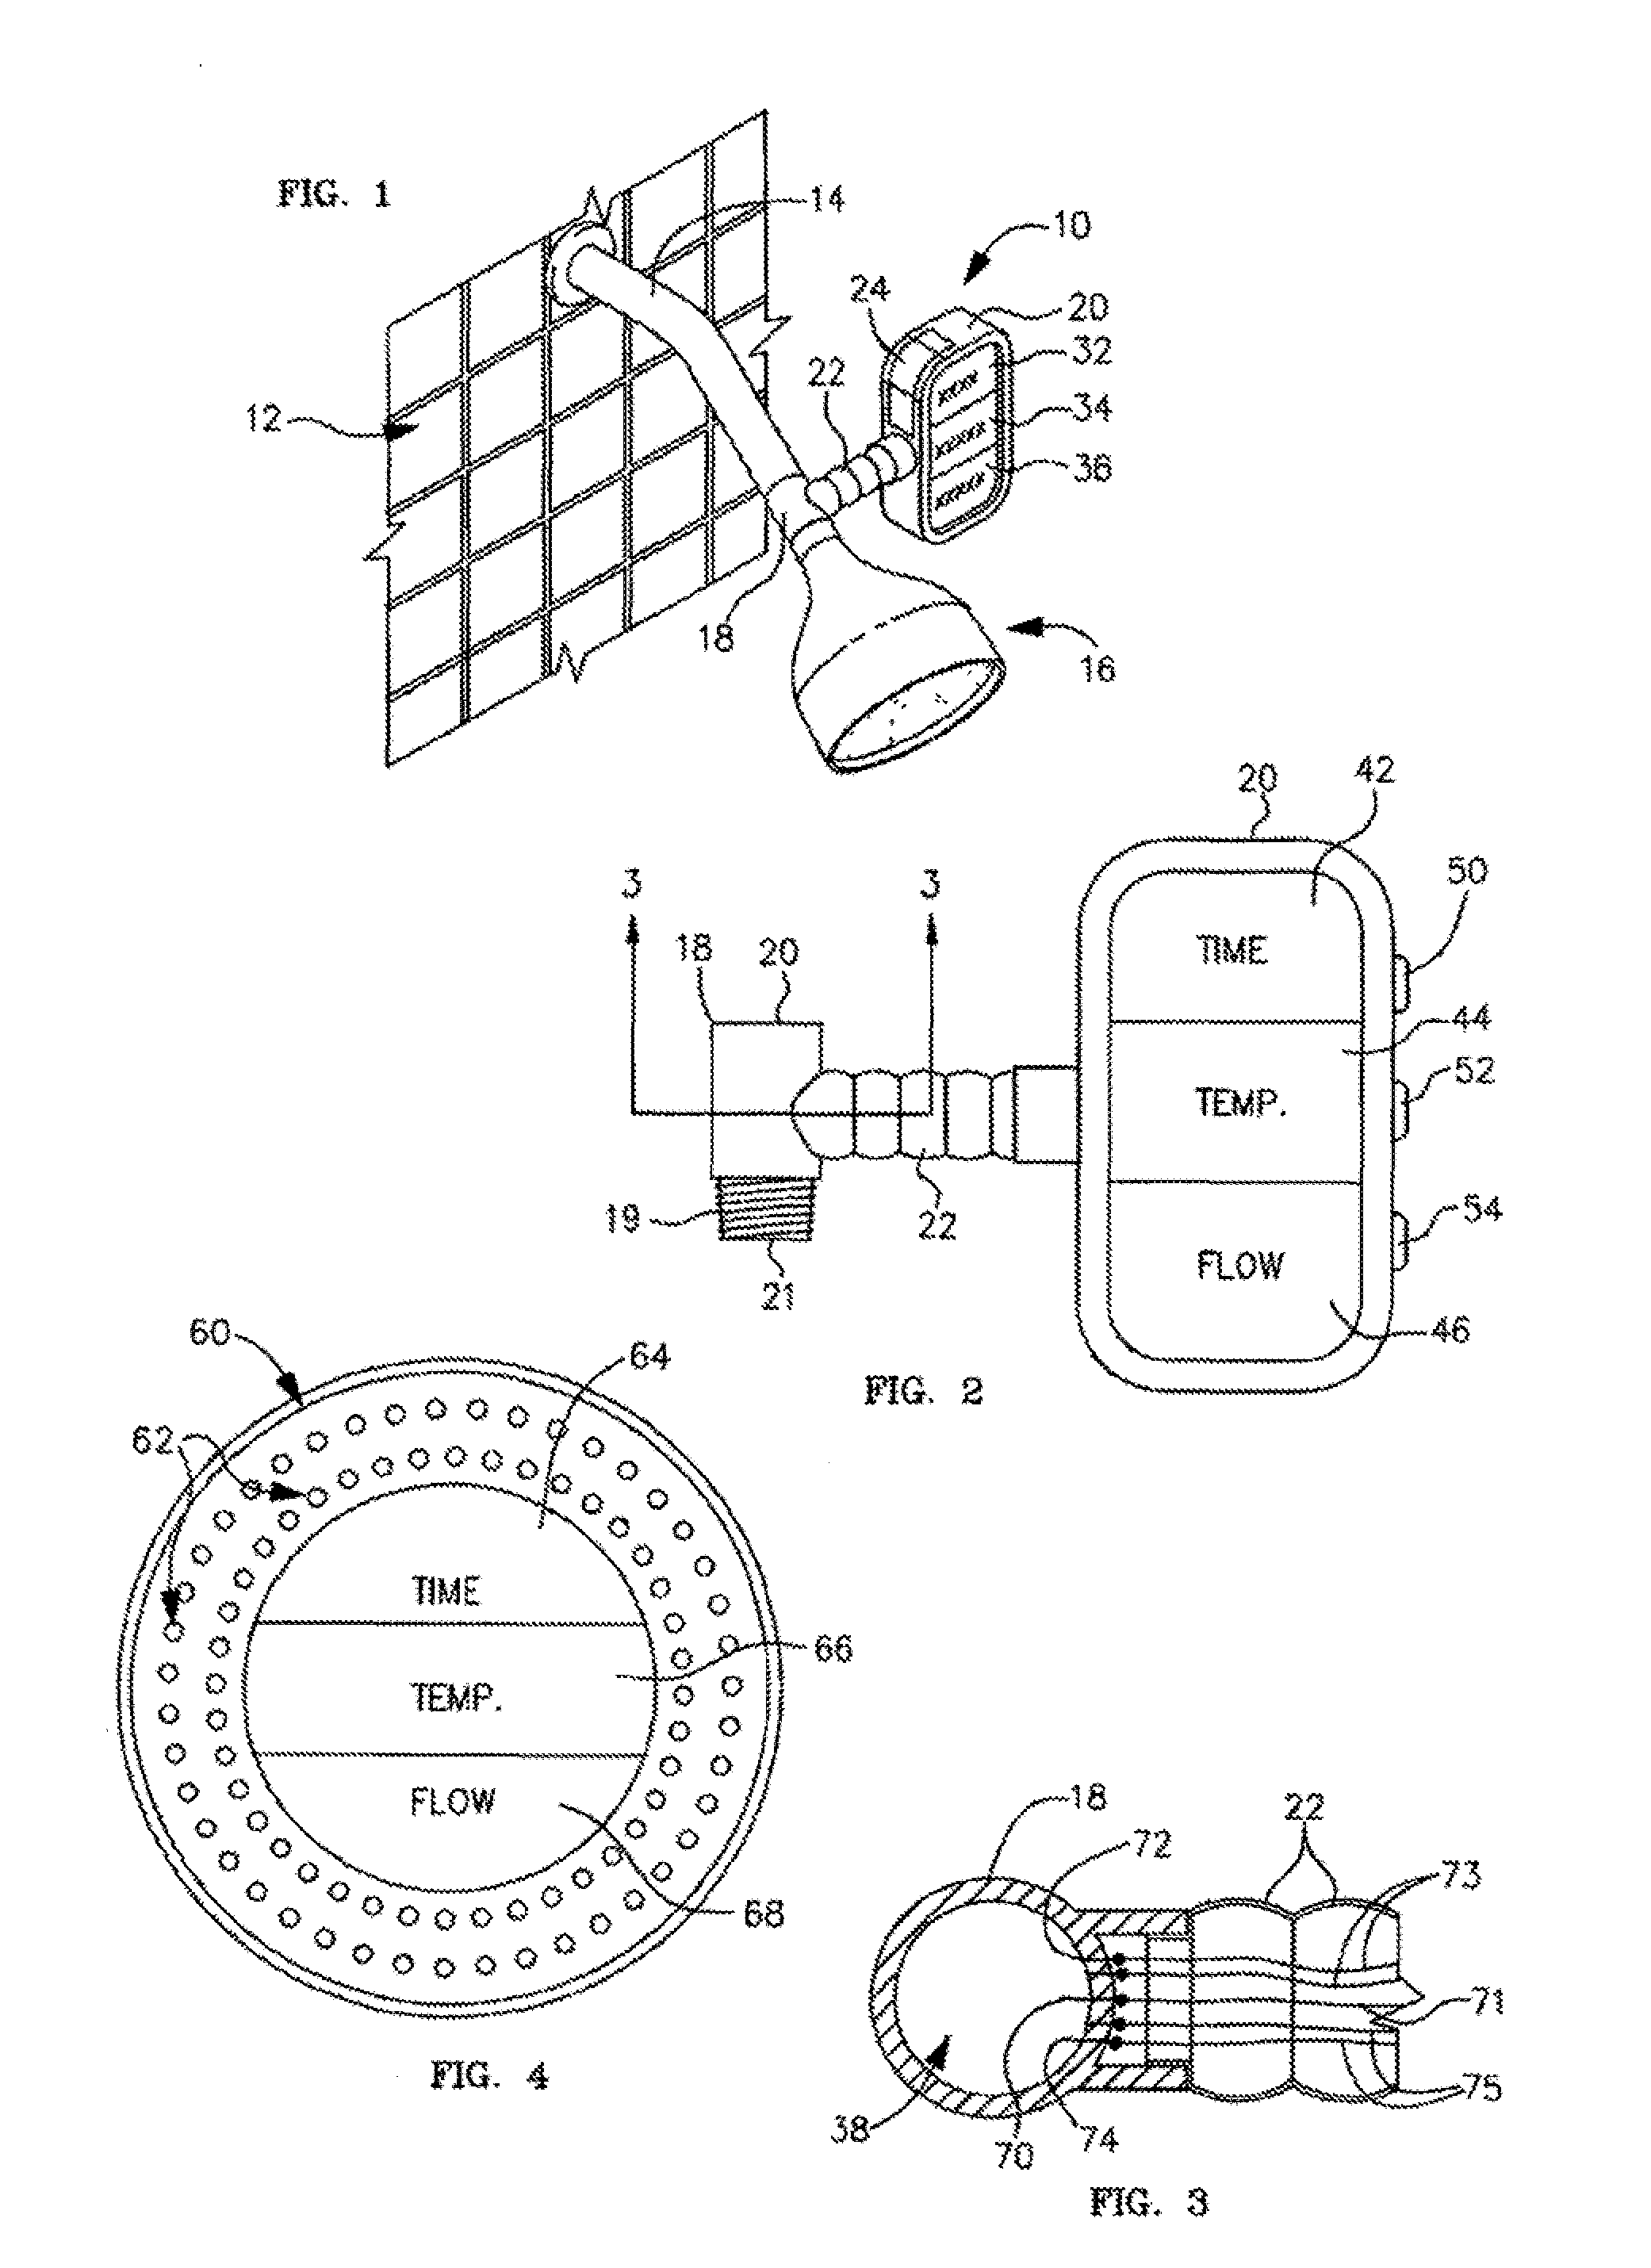 Apparatus for Displaying, Monitoring and/or Controlling Shower, Bath or Sink Faucet Water Parameters with an Audio or Verbal Annunciations or Control Means